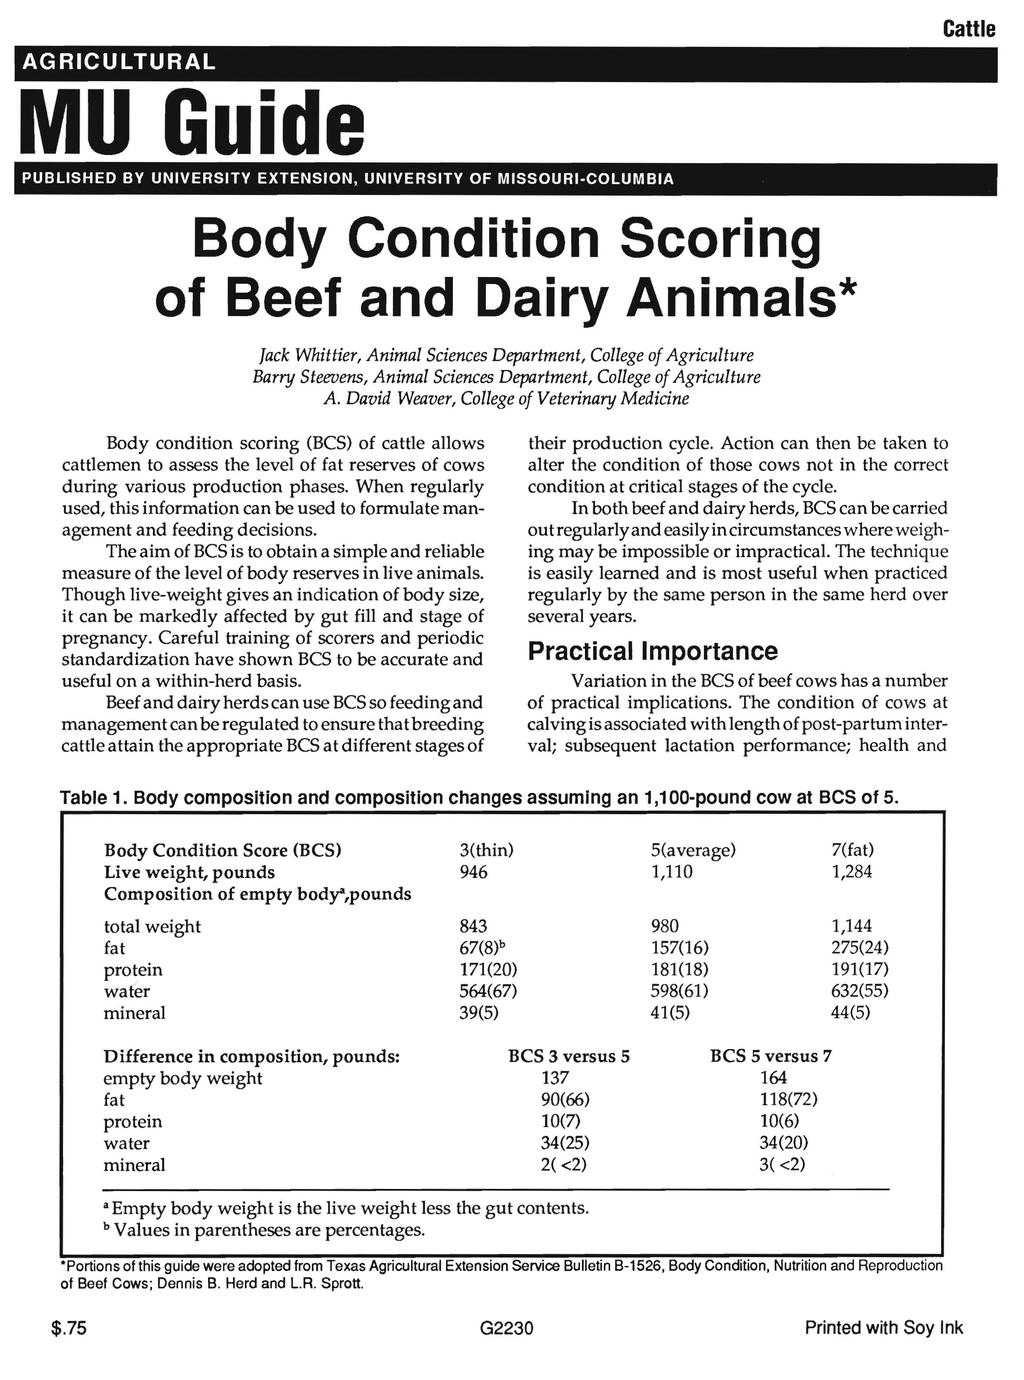 Cattle AGRICULTURAL MU Guide PUBLISHED BY UNIVERSITY EXTENSION, UNIVERSITY OF MISSOURI-COLUMBIA Body Condition Scoring of Beef and Dairy Animals* Jack Whittier, Animal Sciences Department, College of